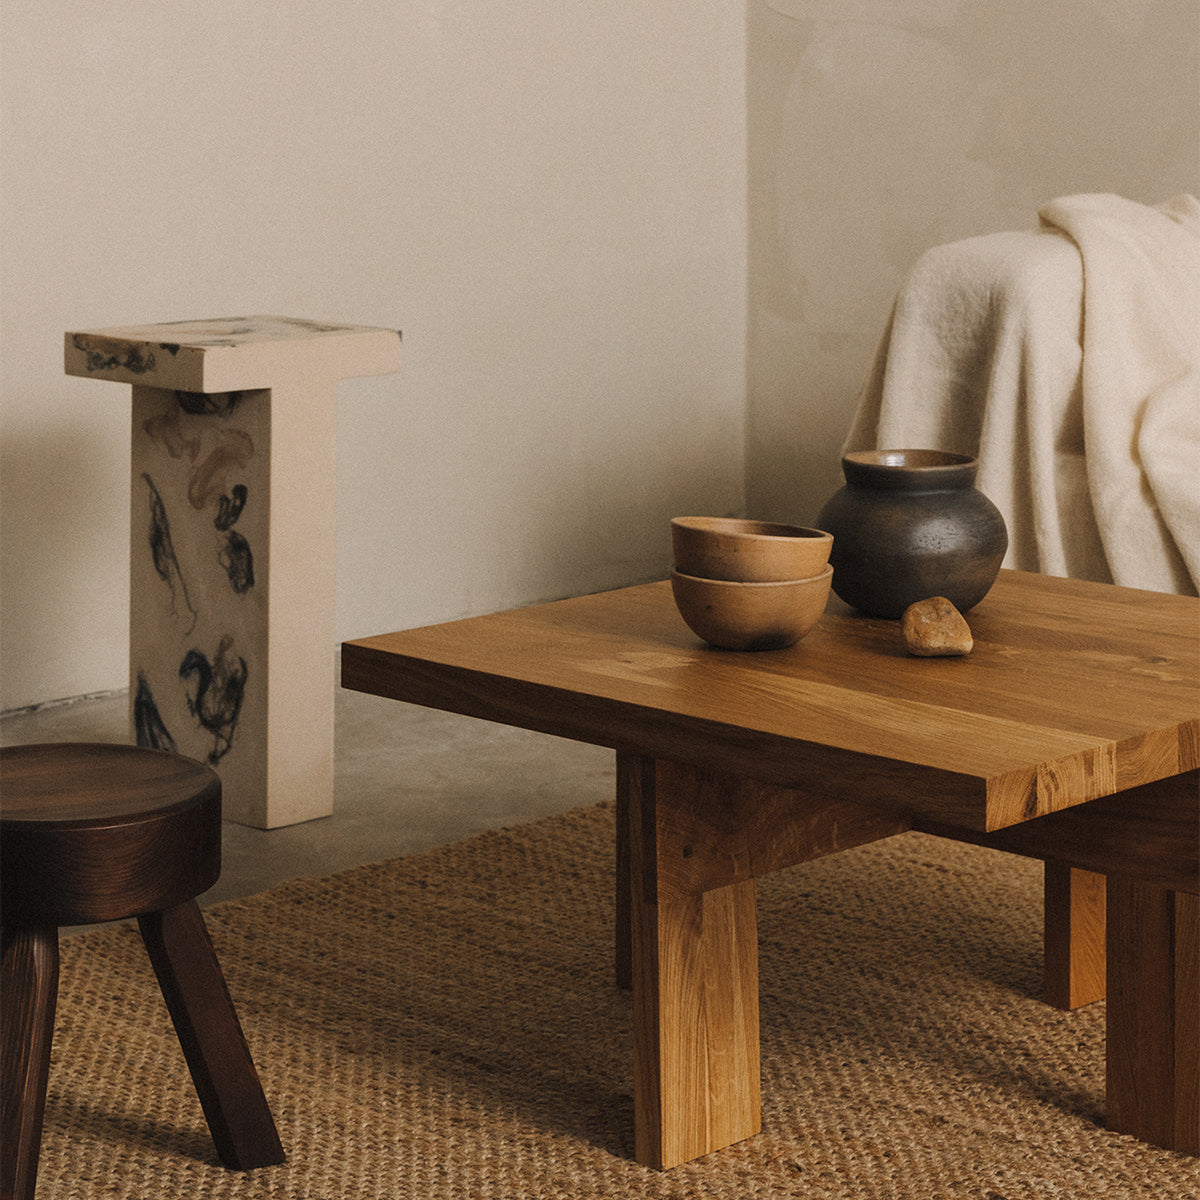 Frama farmhouse coffee table square in a setting with a rug, a statue and the AML stool by Frama